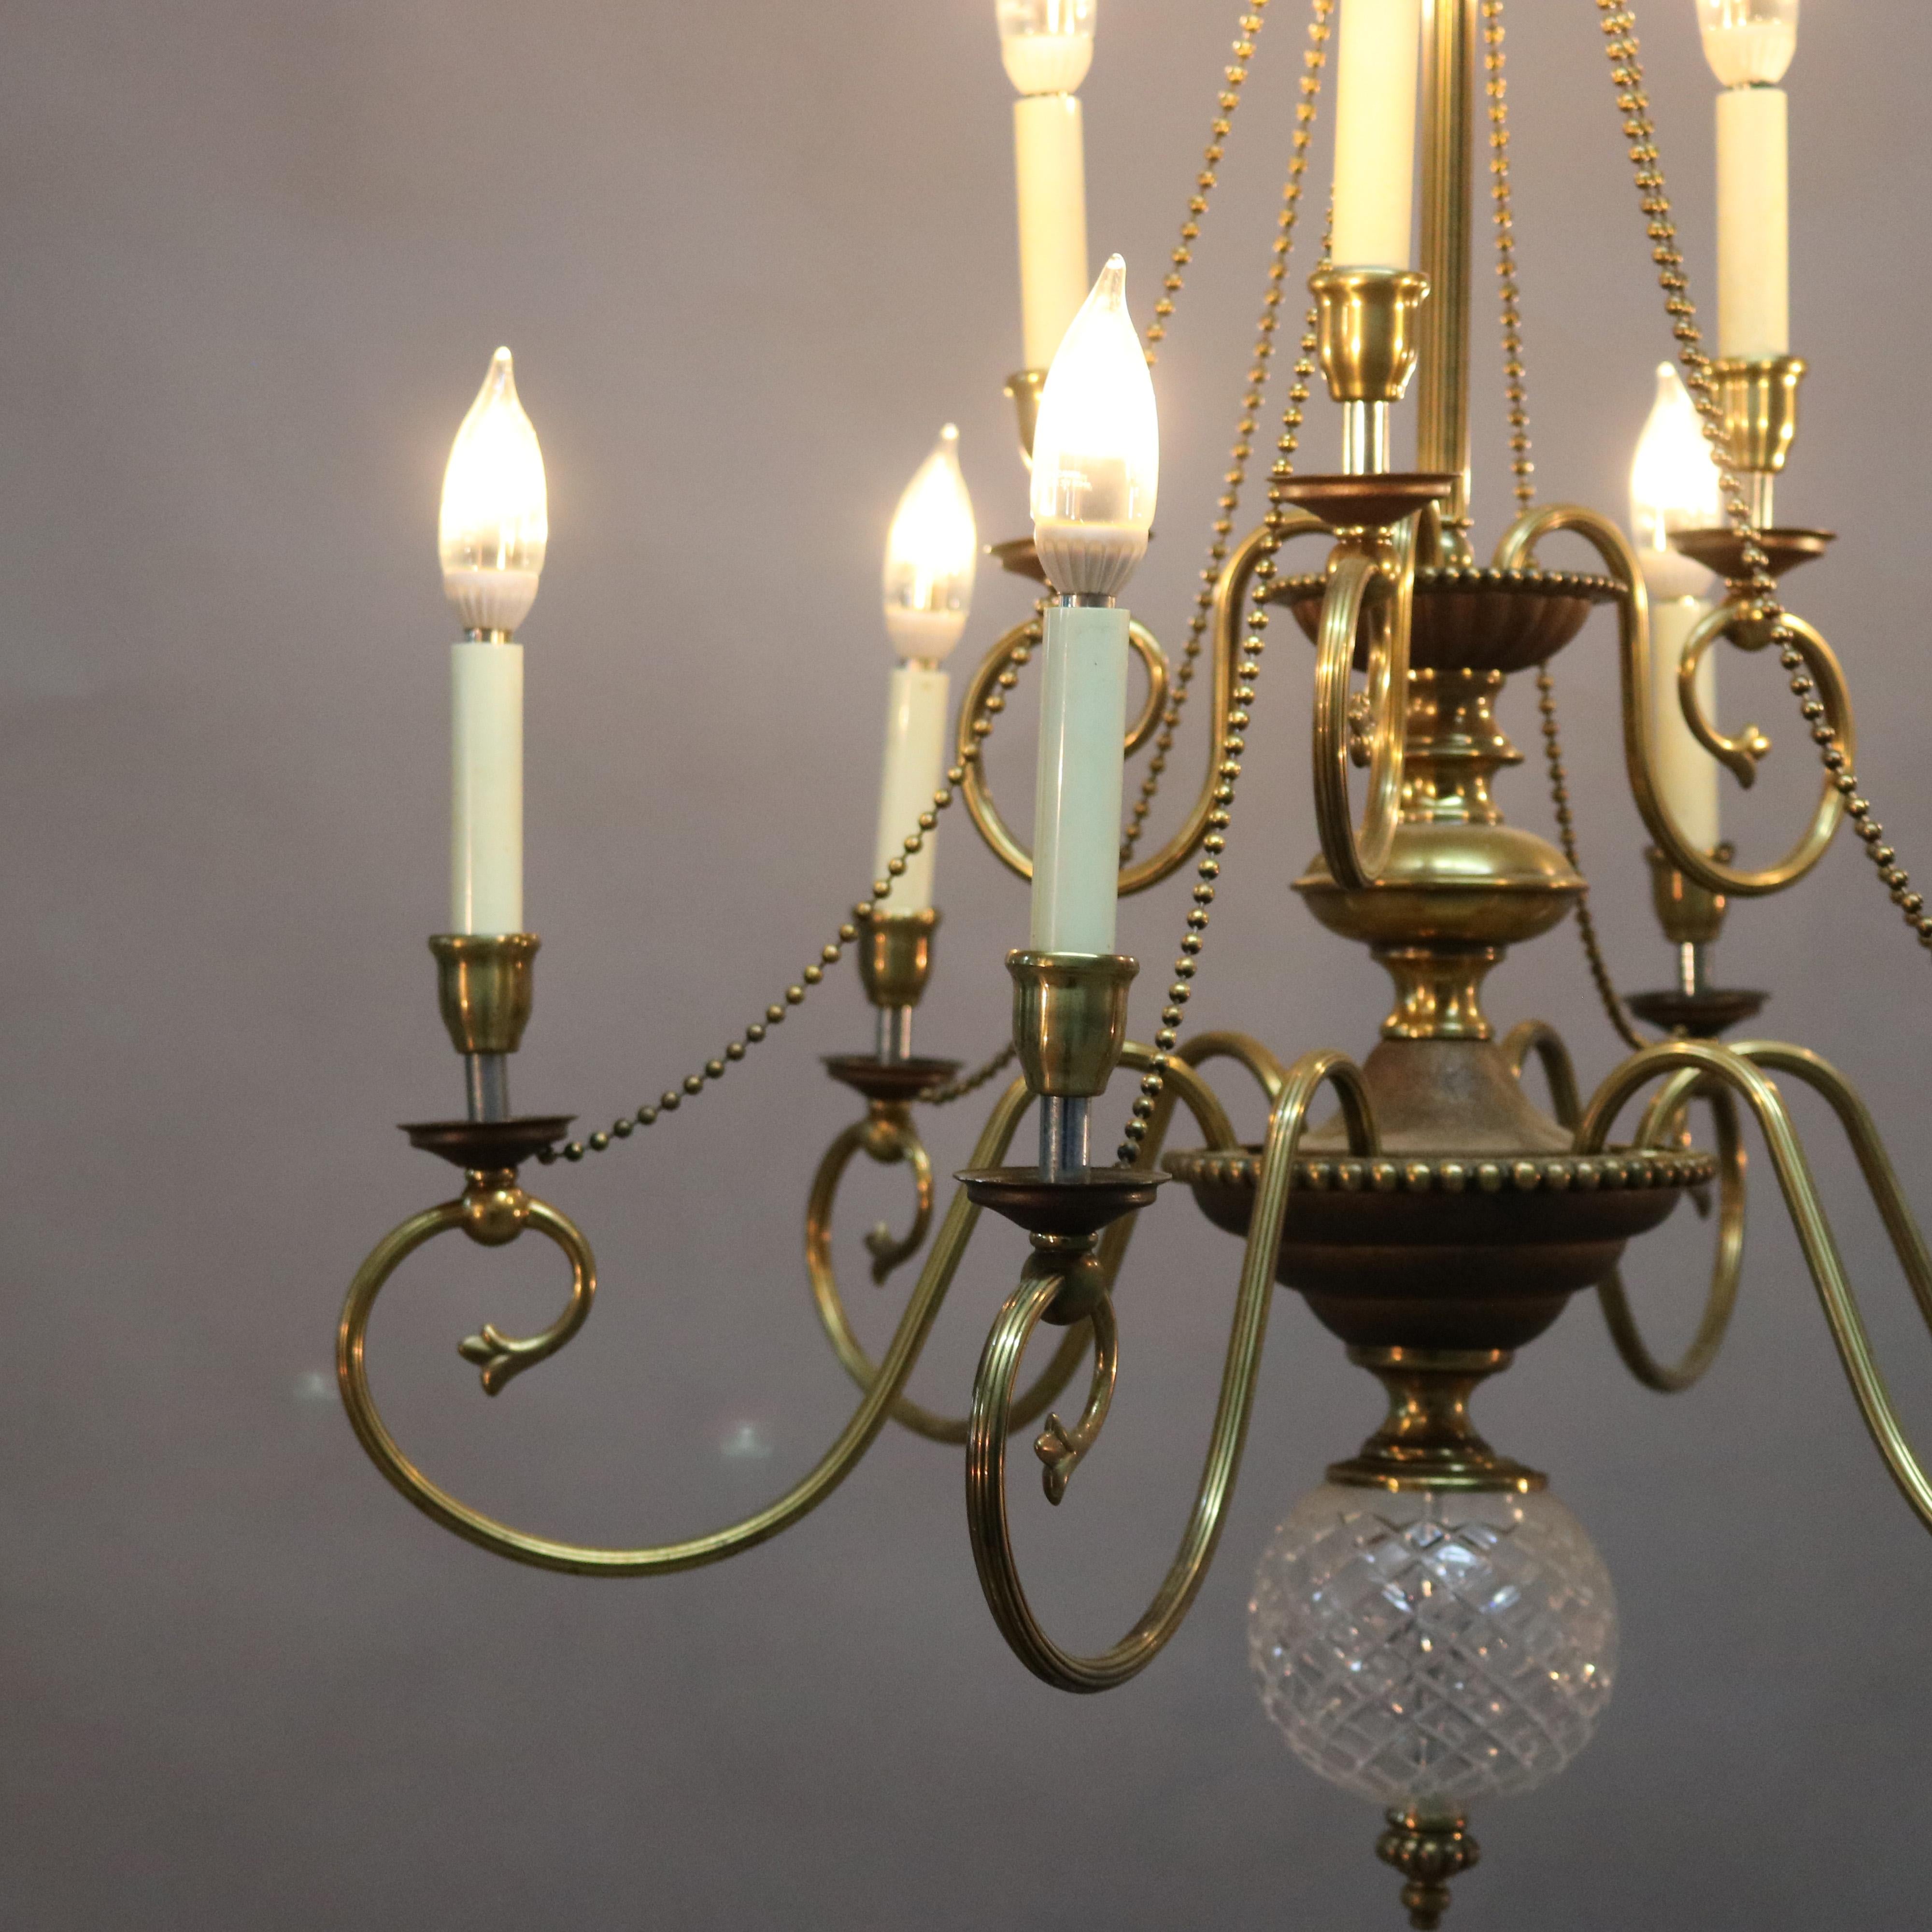 Vintage French Nine-Light Tiered Brass and Crystal Chandelier, 20th Century For Sale 2